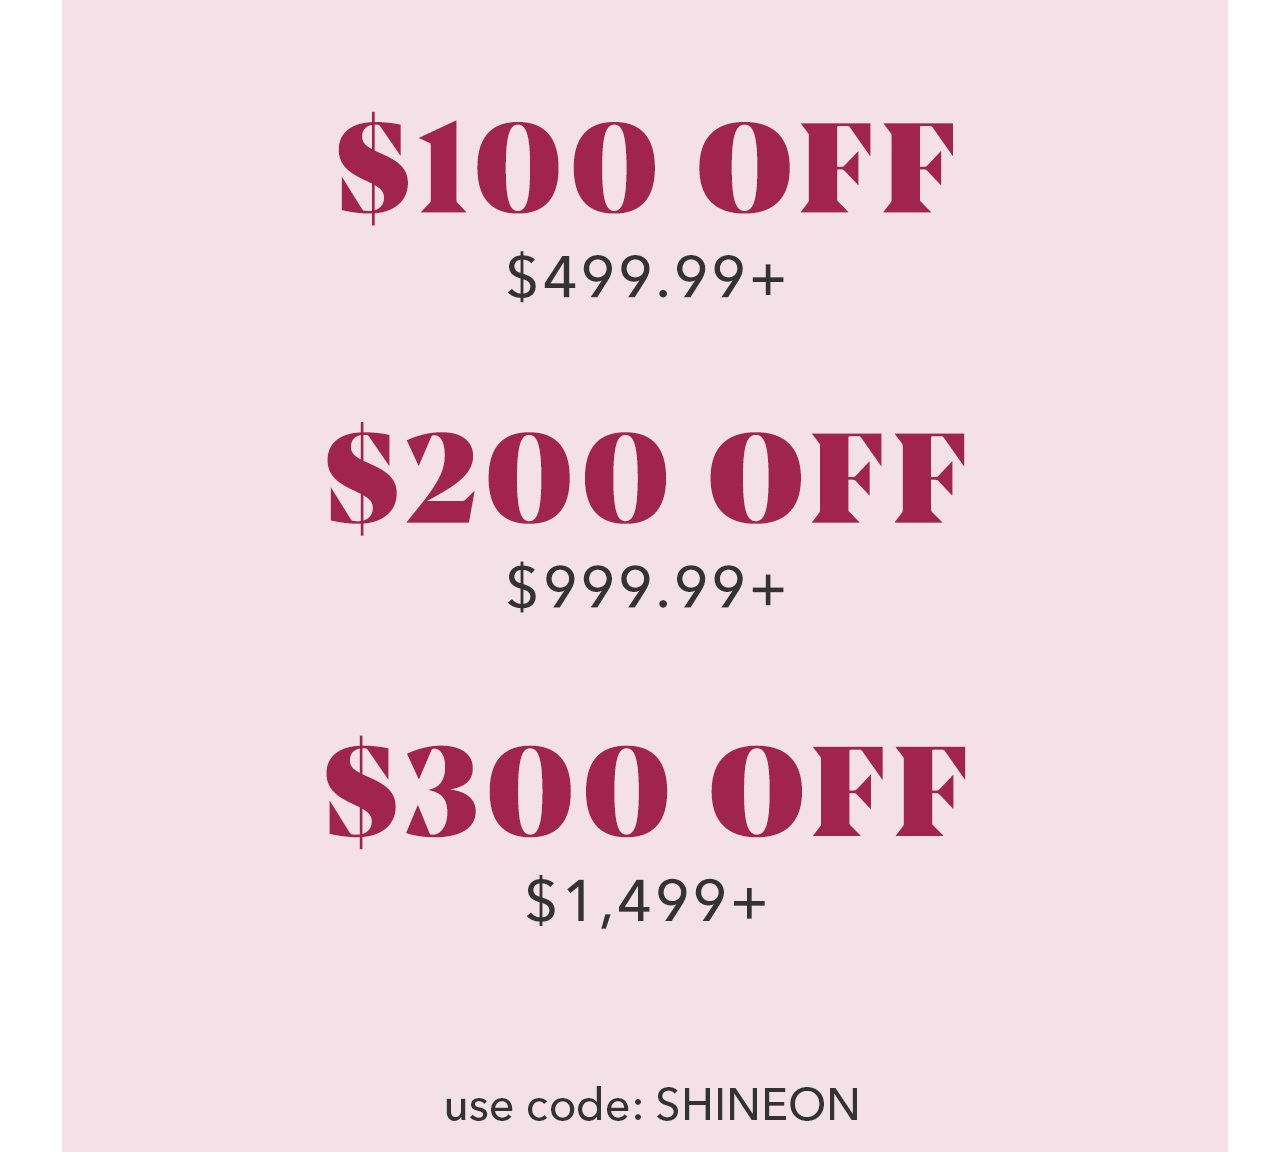 Online only! Save up to $300 with code: SHINEON